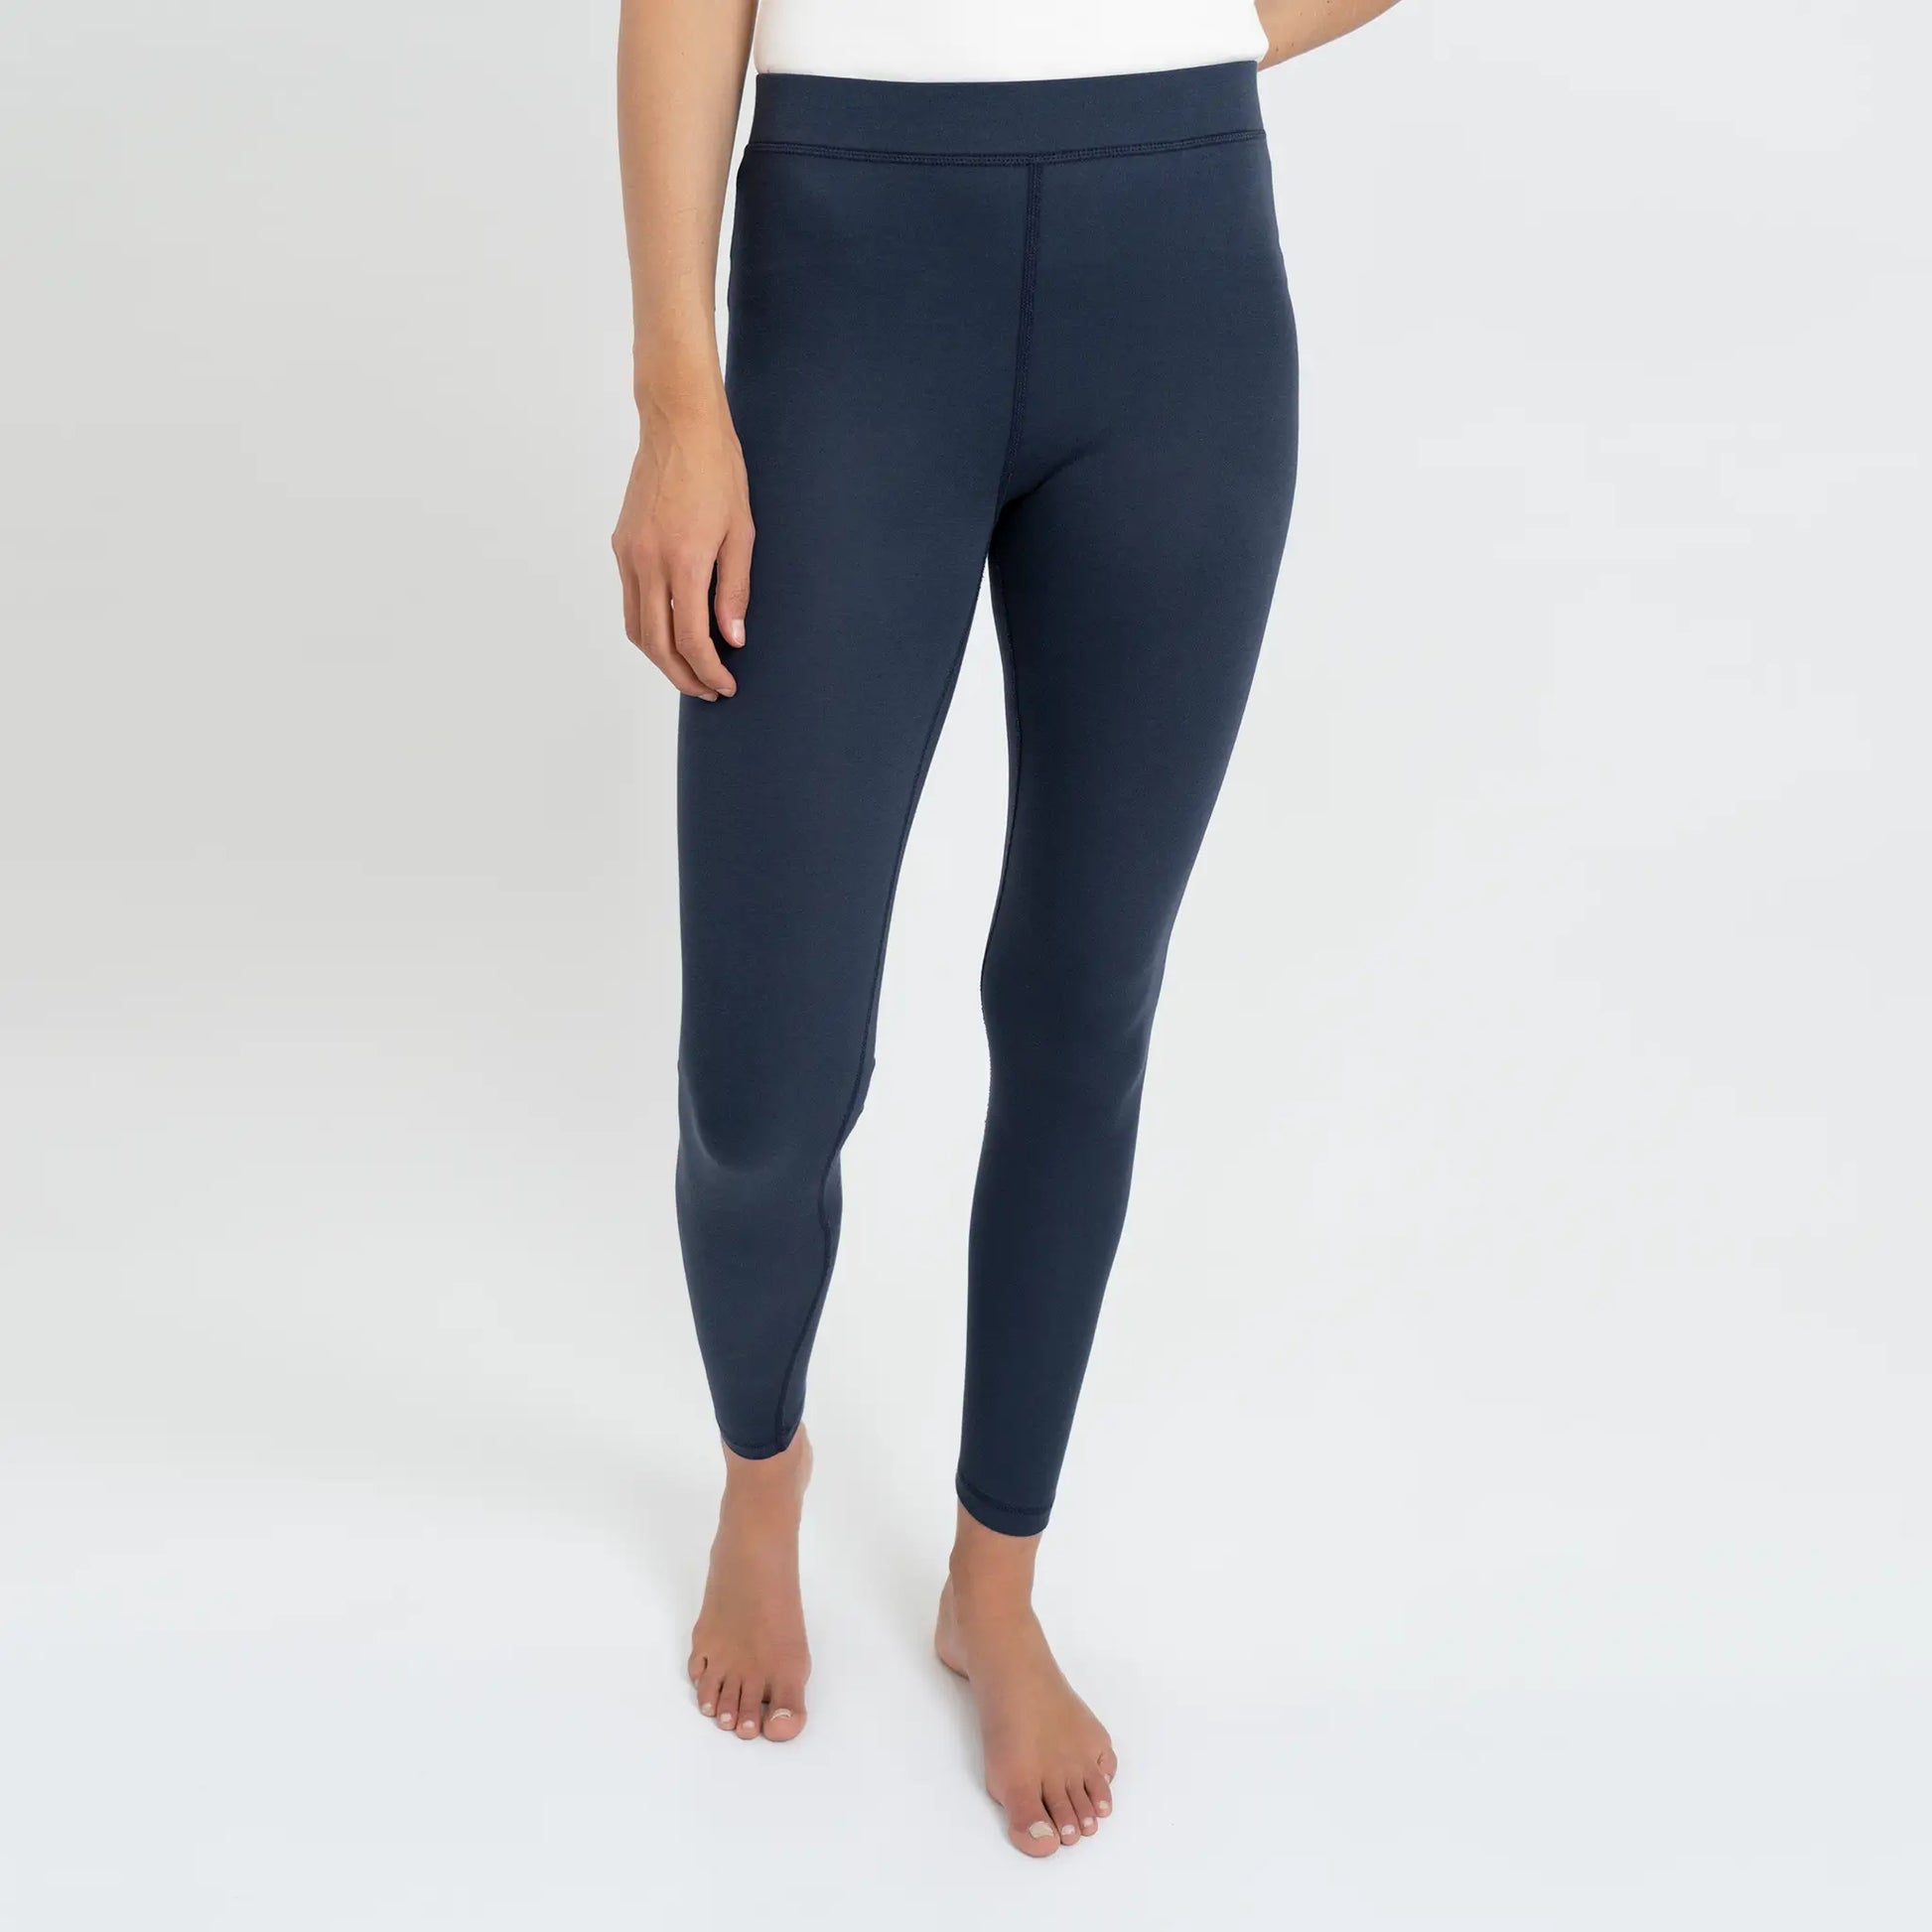 Women's Everyday Navy Tights - Organic Cotton blend - Solne Eco